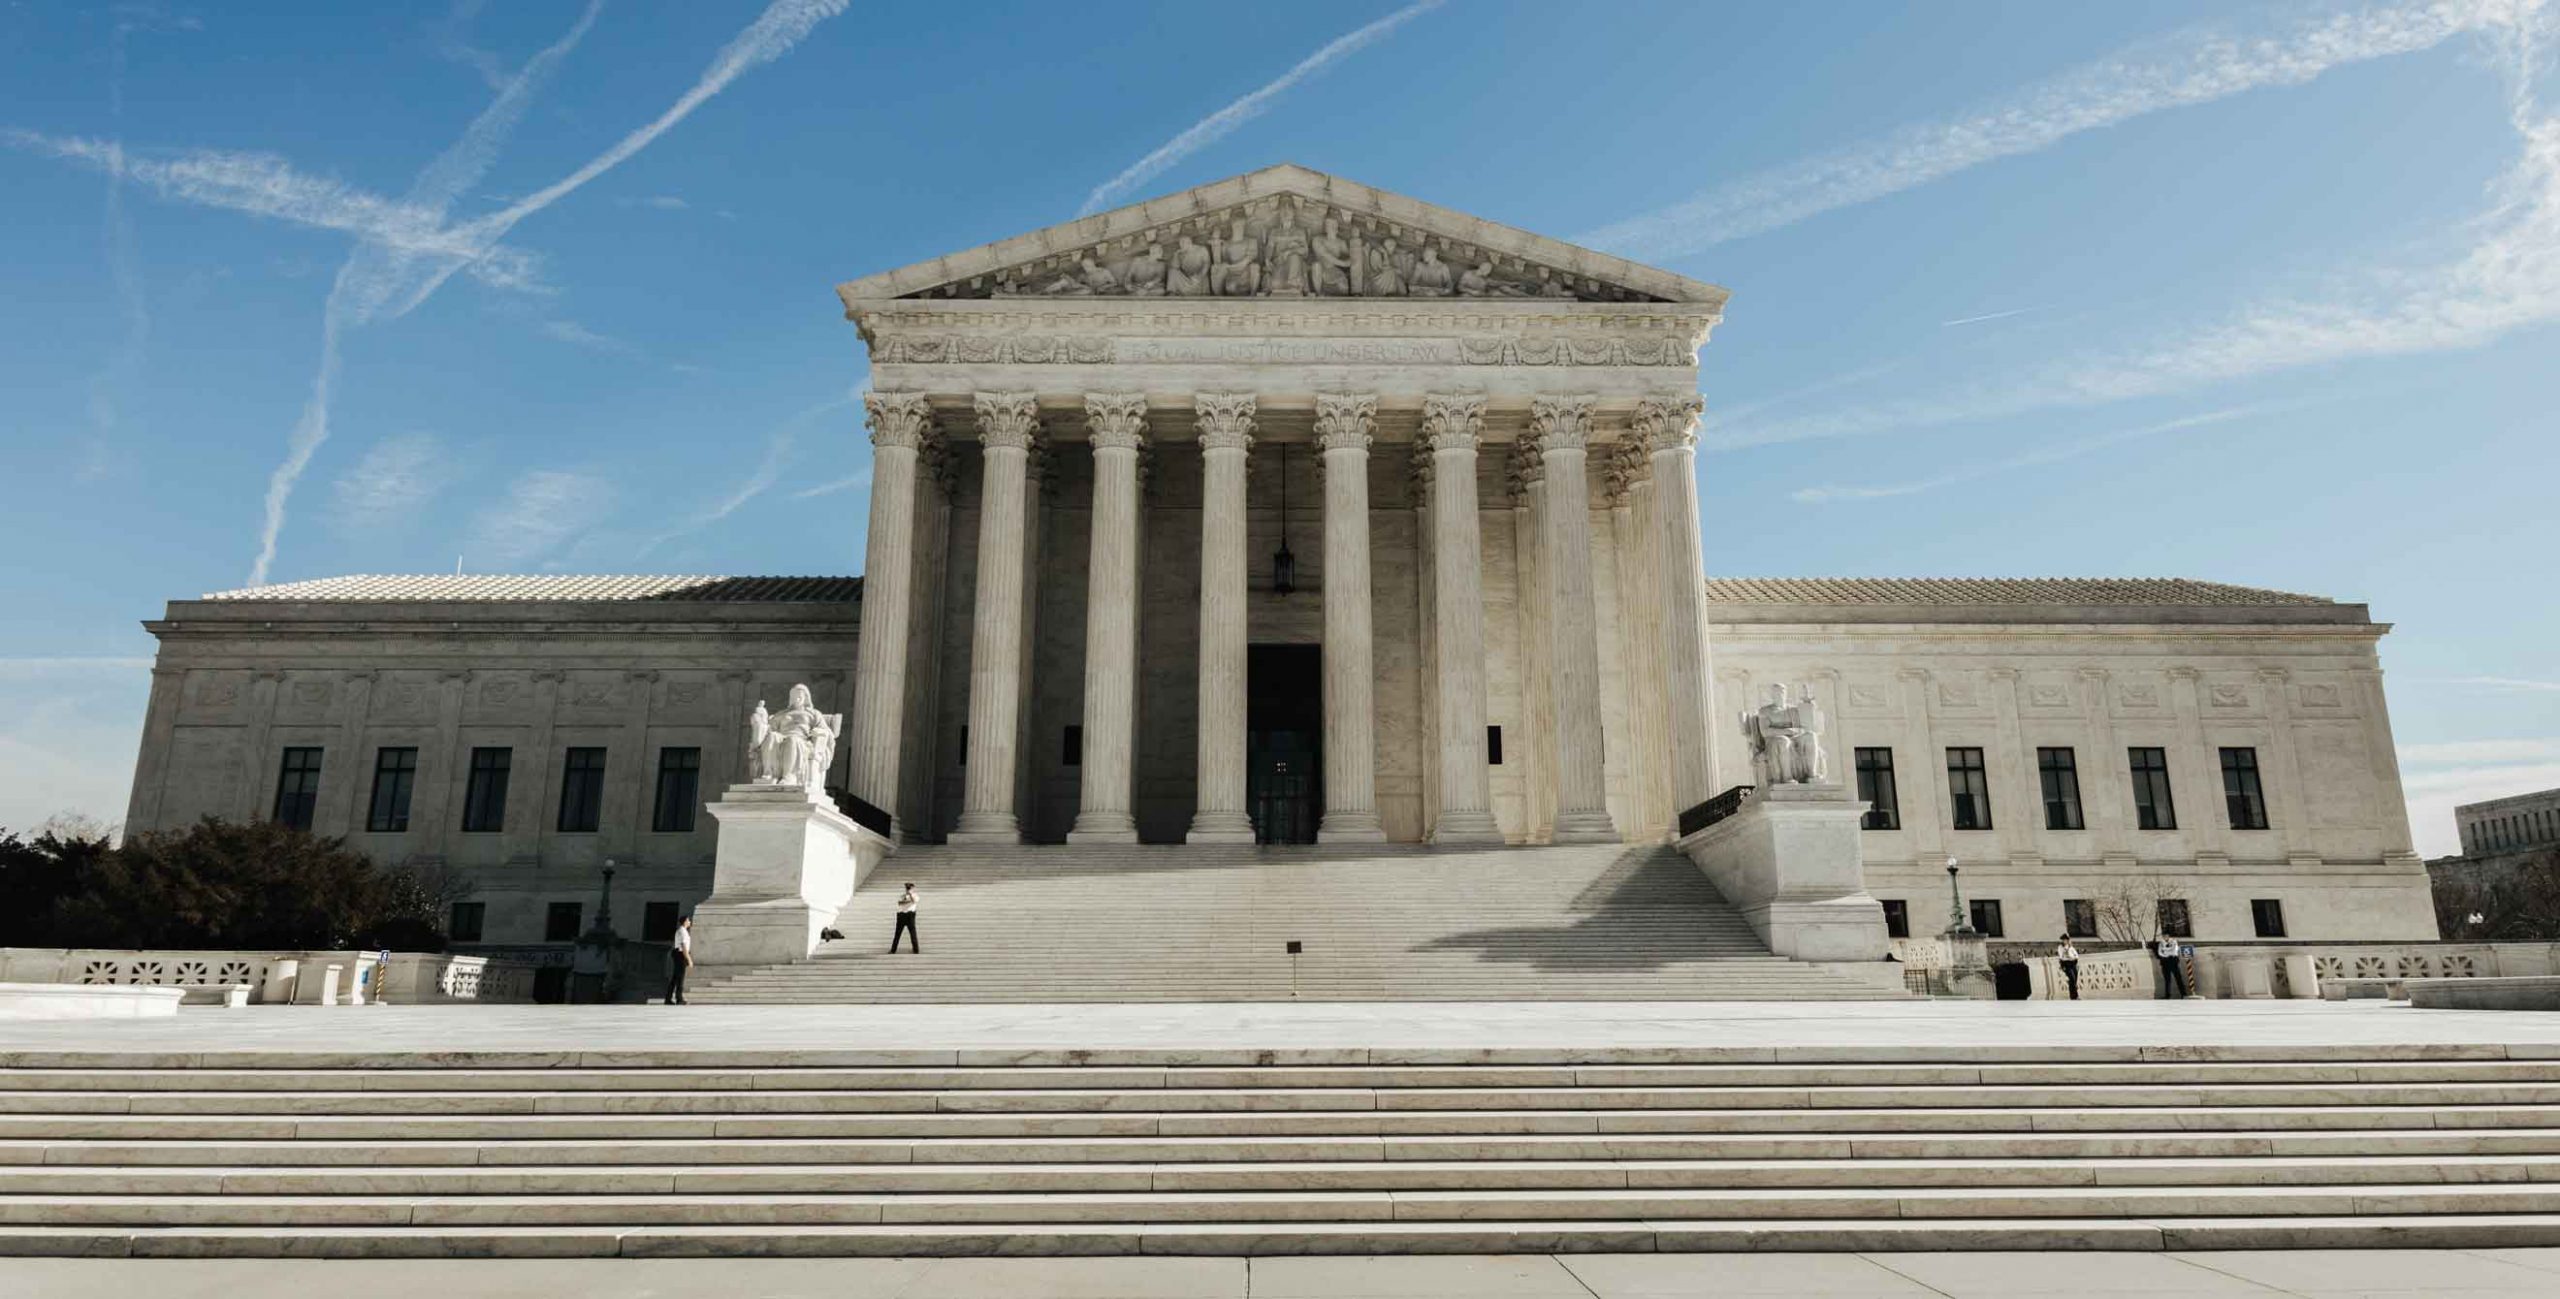 The U.S. Supreme Court has ruled in favor of health insurers that had sued the federal government over the massive funding shortfalls for the Affordable Care Act's risk corridors program.